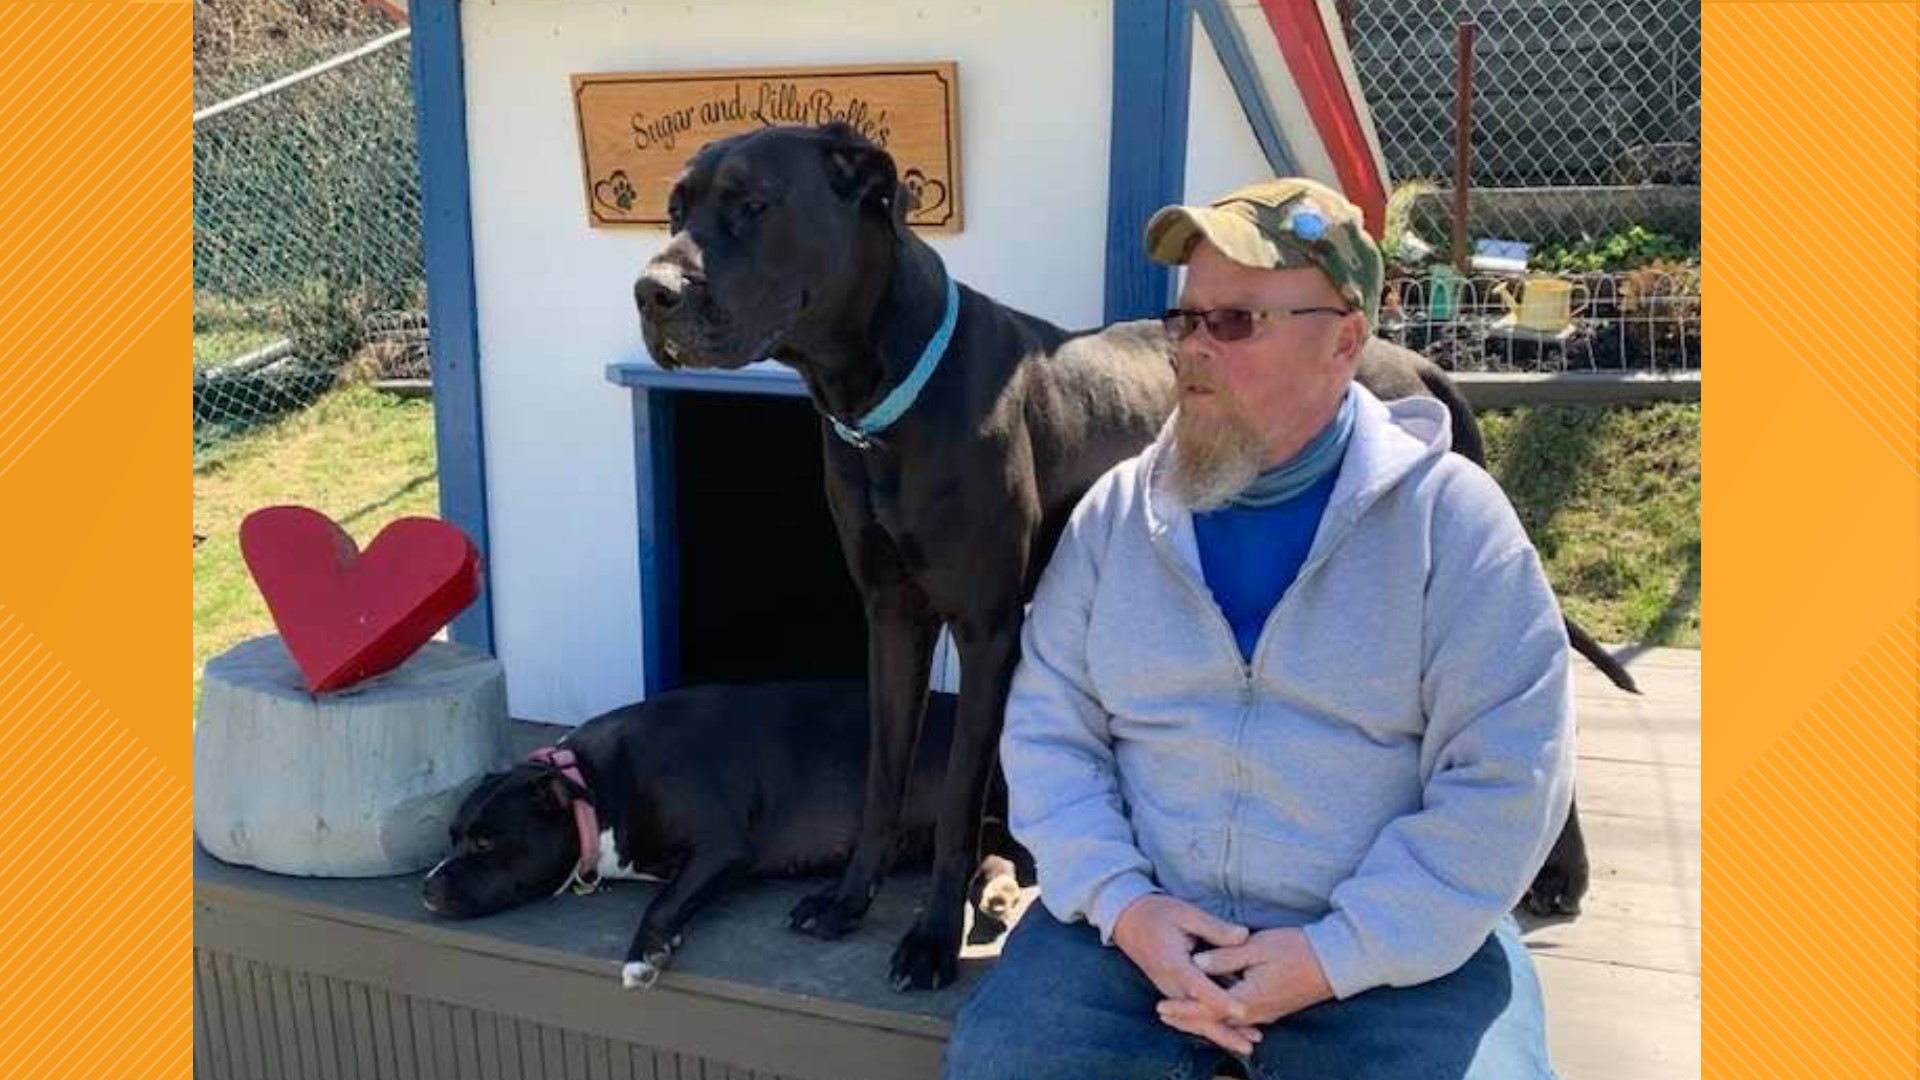 For a county-run shelter in Nesquehoning, not even a cancer diagnosis stopped one man and animal lover from being there for dozens of dogs day in and day out.